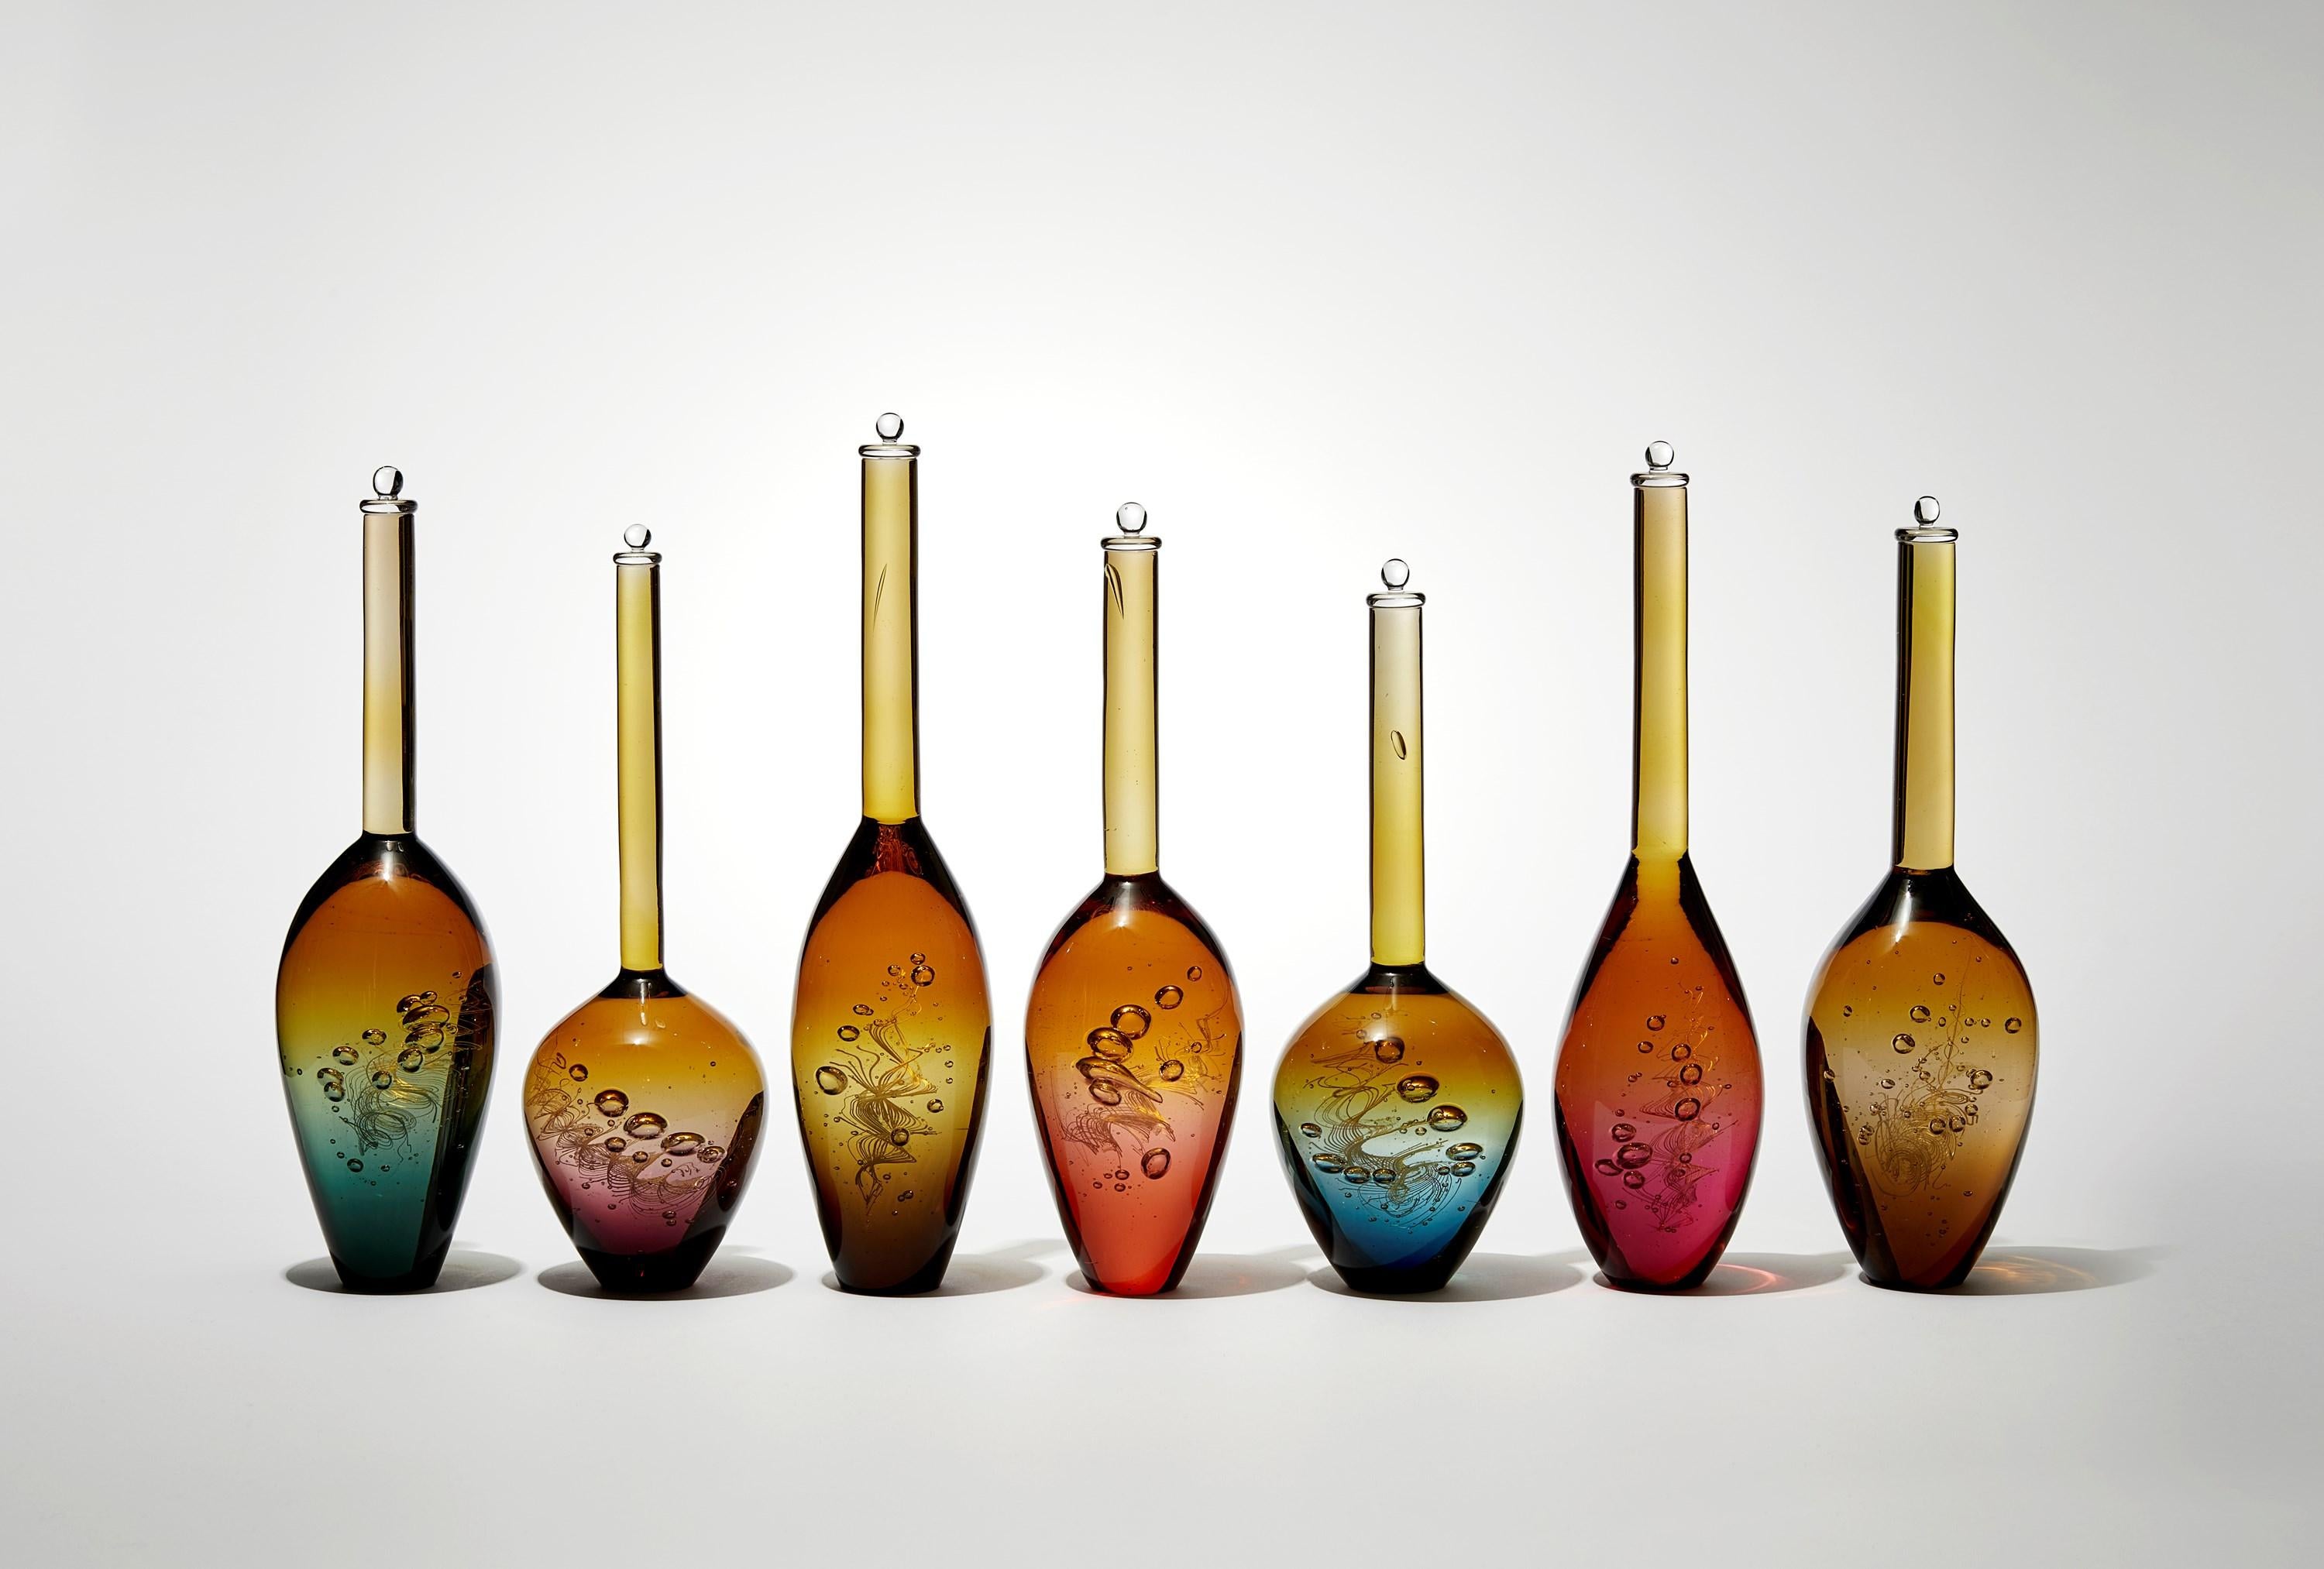 'Archive of DNA: D7S820 Allel 2' is a unique glass installation (consisting of 7 individual elements) by the British artist, Louis Thompson.

Accomplished glass artist Thompson explores illusion and the perceptions of glass, fascinated by the haptic